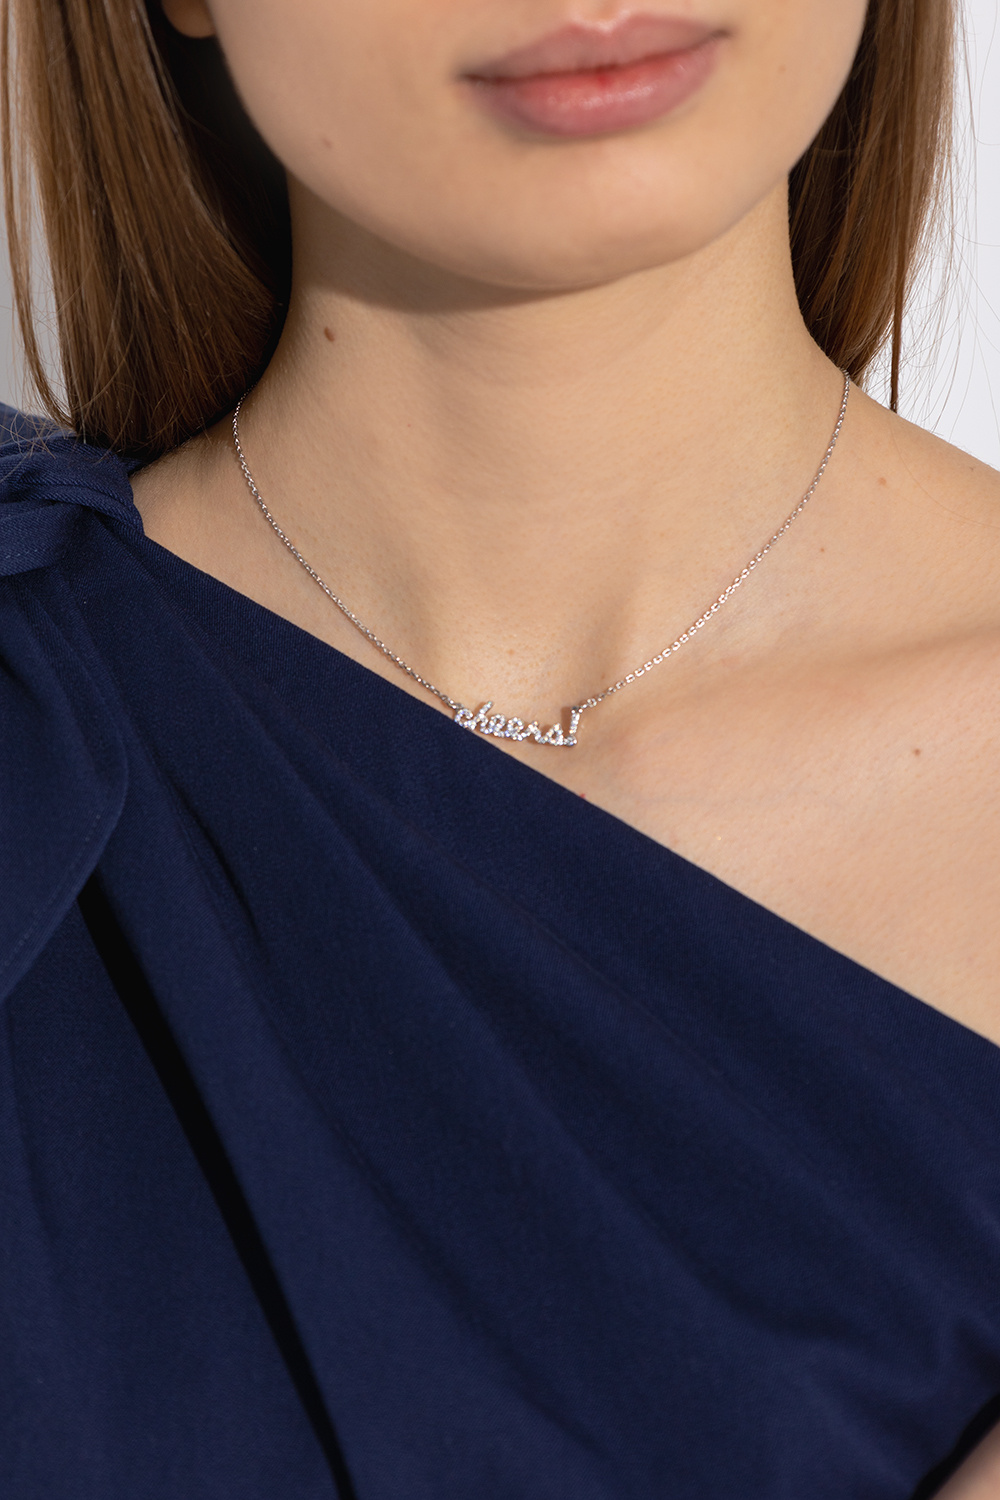 Kate Spade ‘Say Yes’ necklace